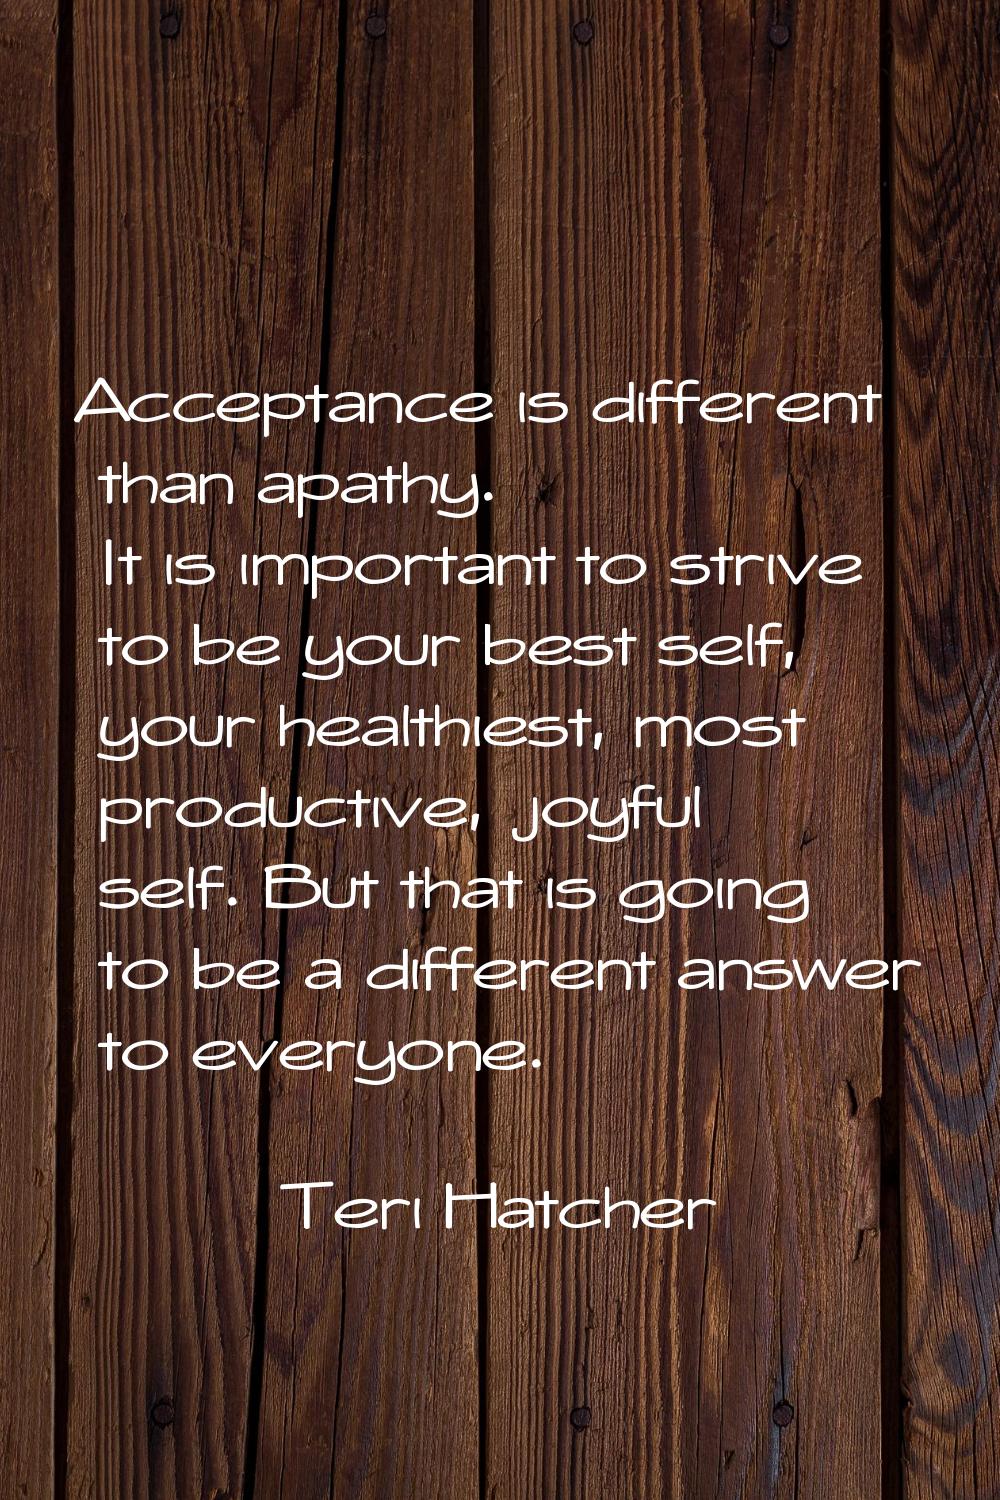 Acceptance is different than apathy. It is important to strive to be your best self, your healthies